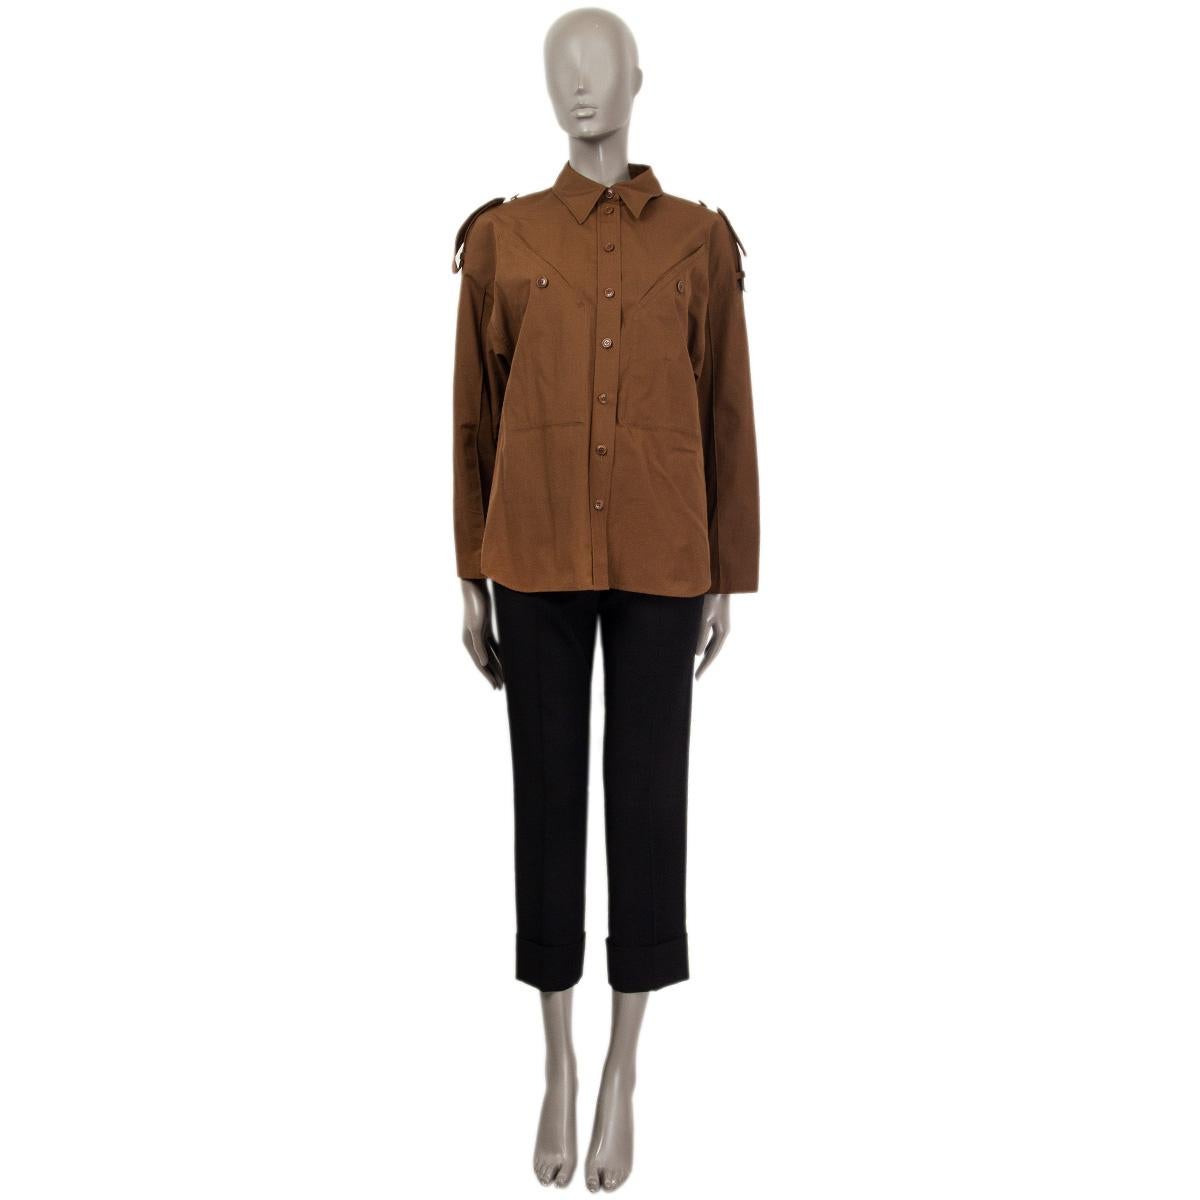 100% authentic Givenchy oversized military longsleeve shirt in cotton (100%). With a flat collar, diagonal pockets in the front, raglan sleeves and buttoned cuffs. Embellished with epaulettes and two front buttoned pockets. Has been worn and is in